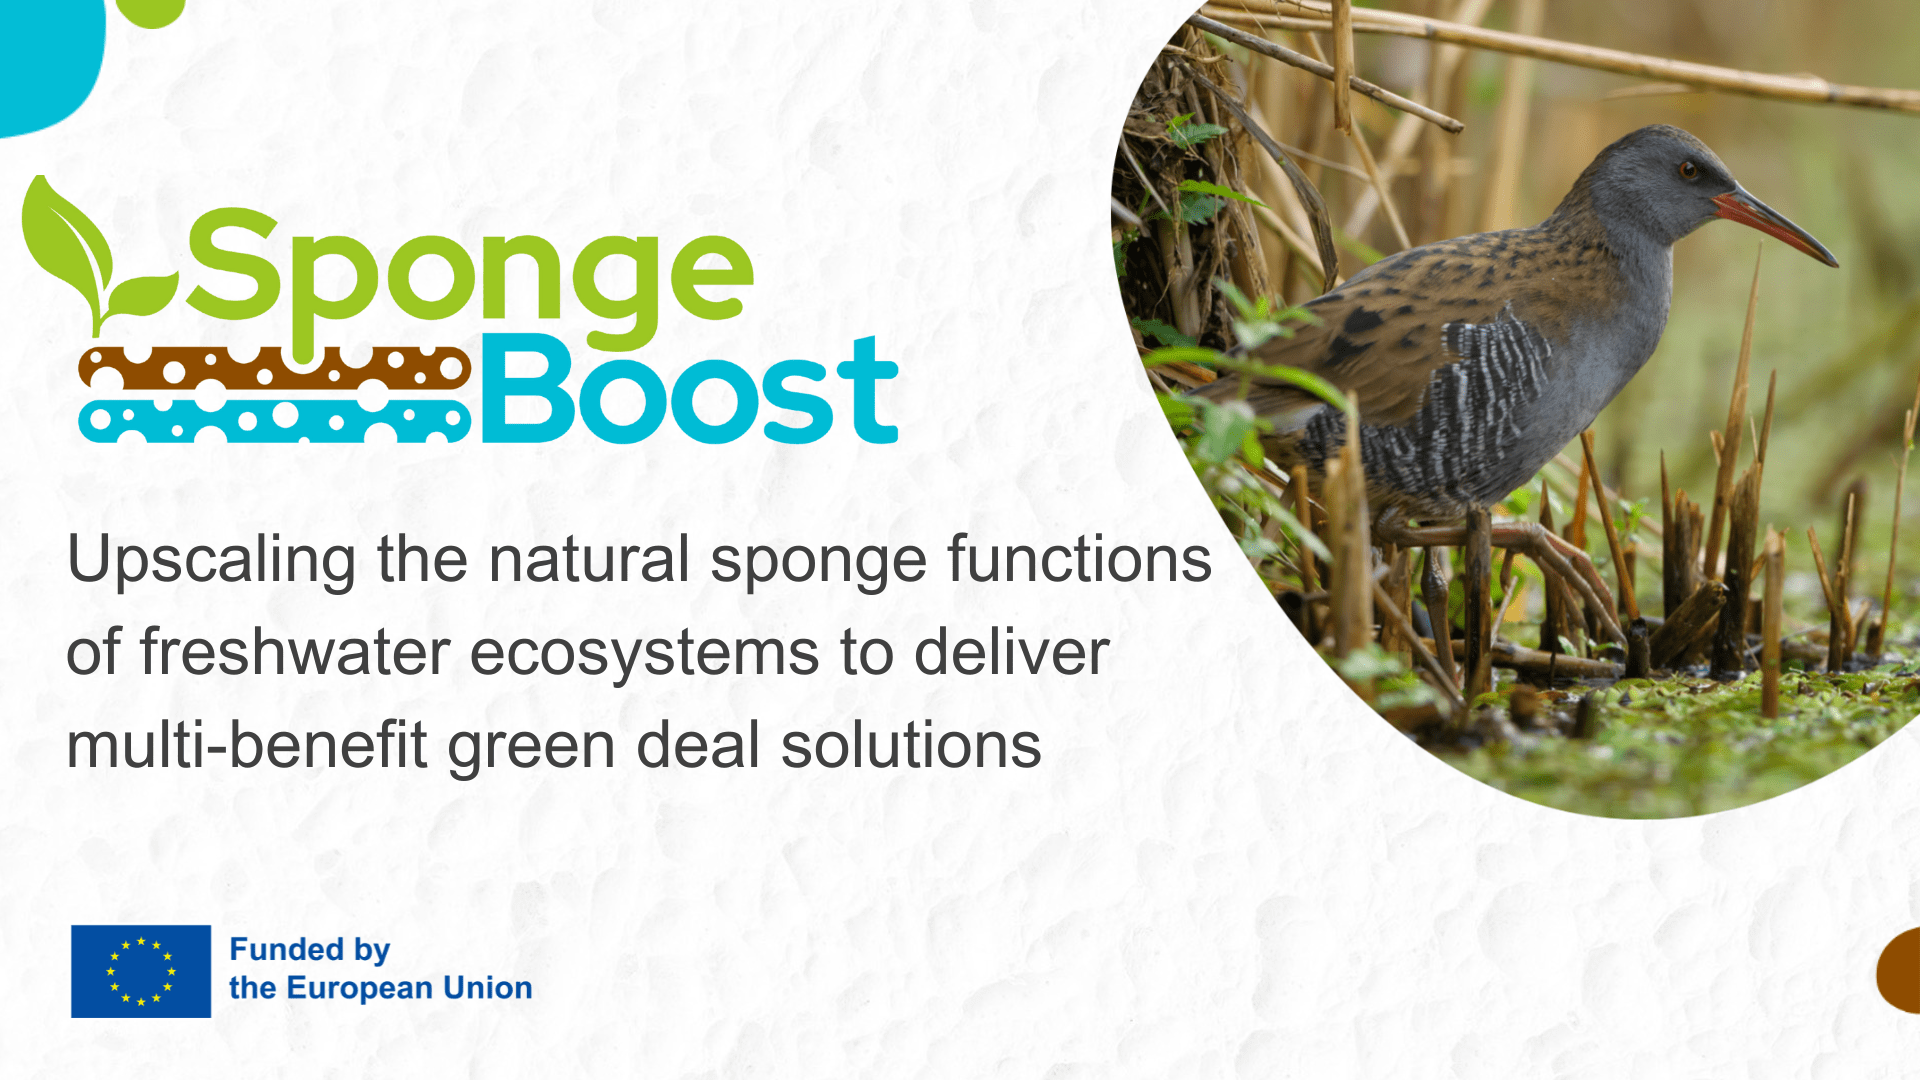 Providing solutions to restoring the natural water retention function of landscapes: Pensoft joins the SpongeBoost project